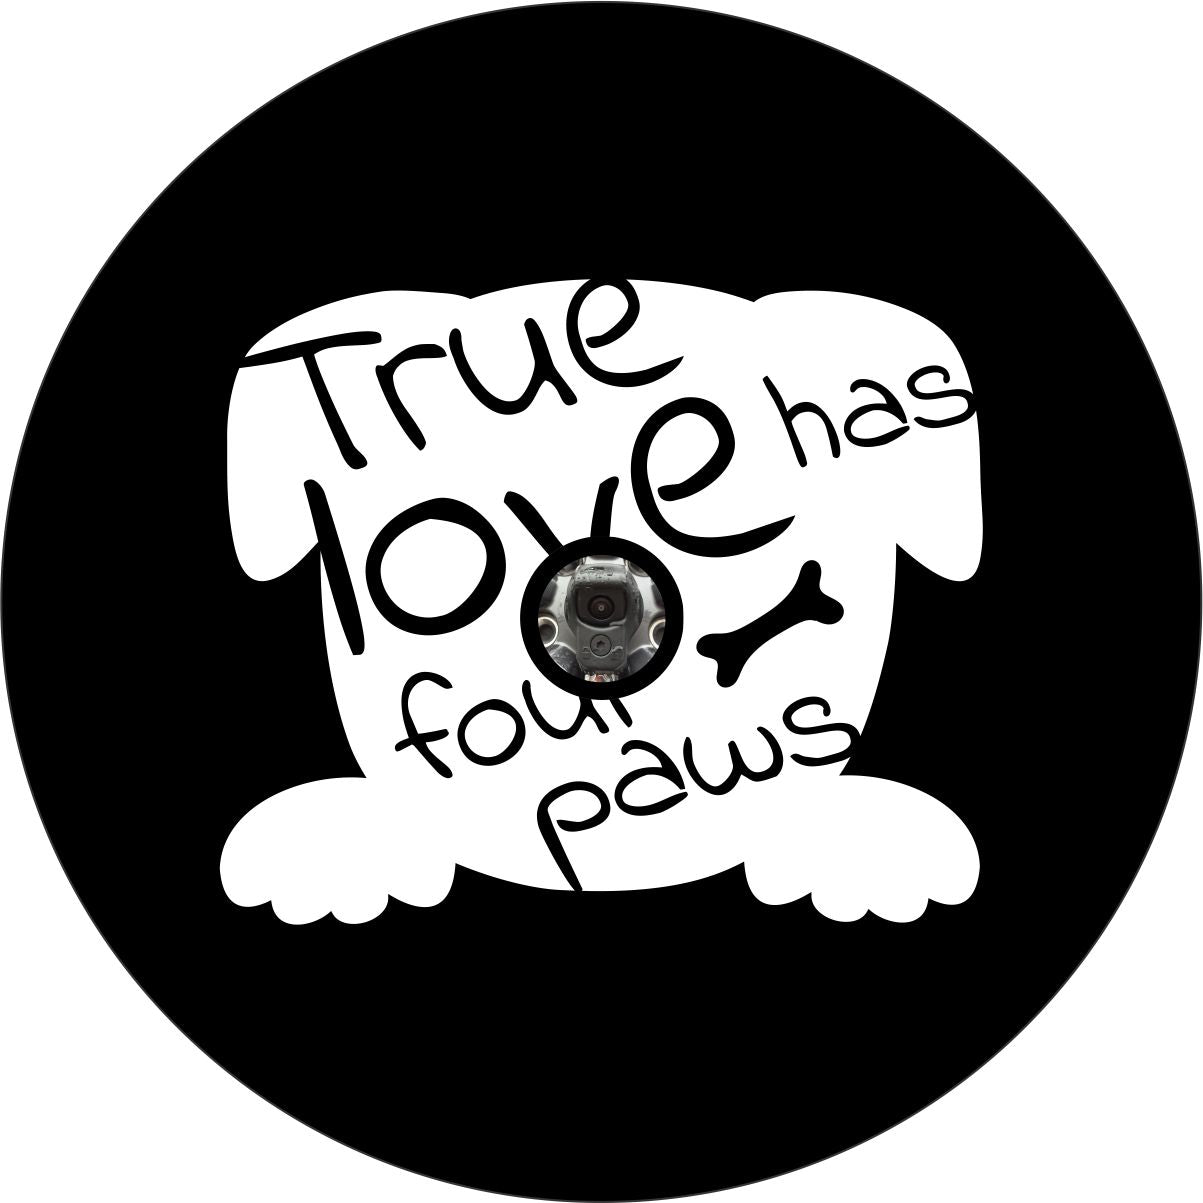 White silhouette of a dog head and paws with the text true love has four paws written within it as a spare tire cover design on black vinyl and a camera hole for vehicles with a backup camera on their spare wheel